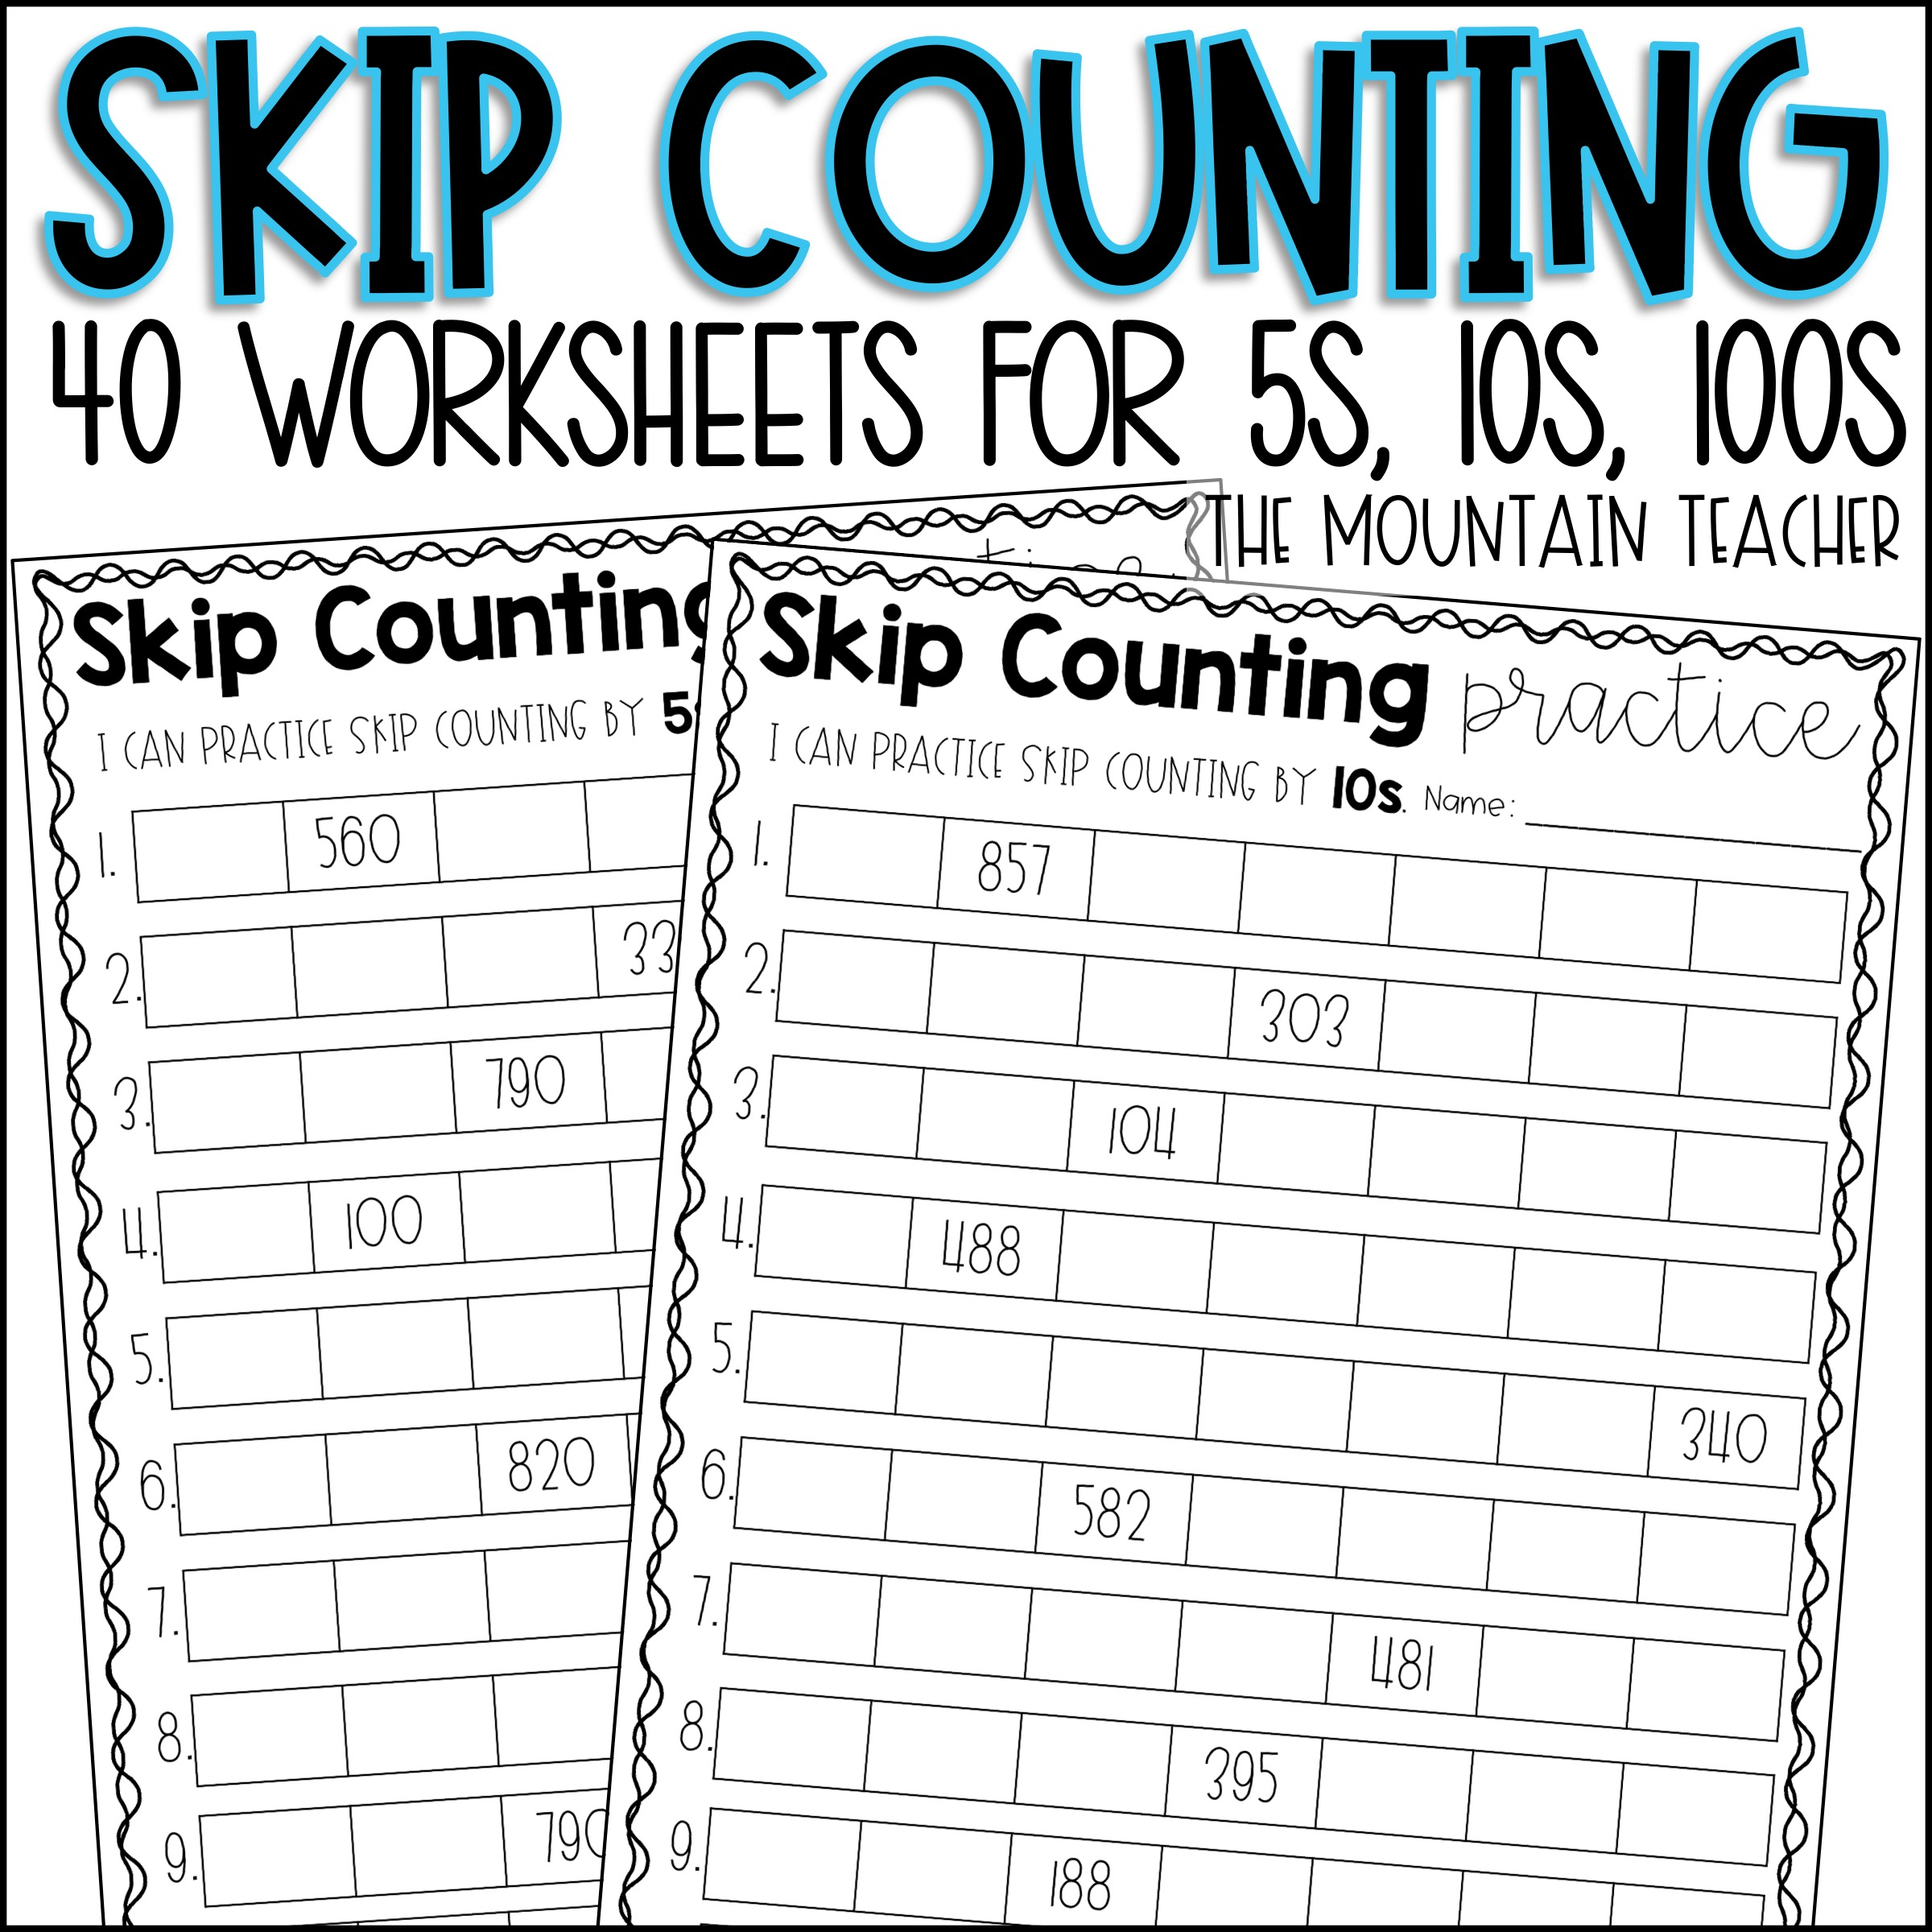 skip-counting-countingworksheets